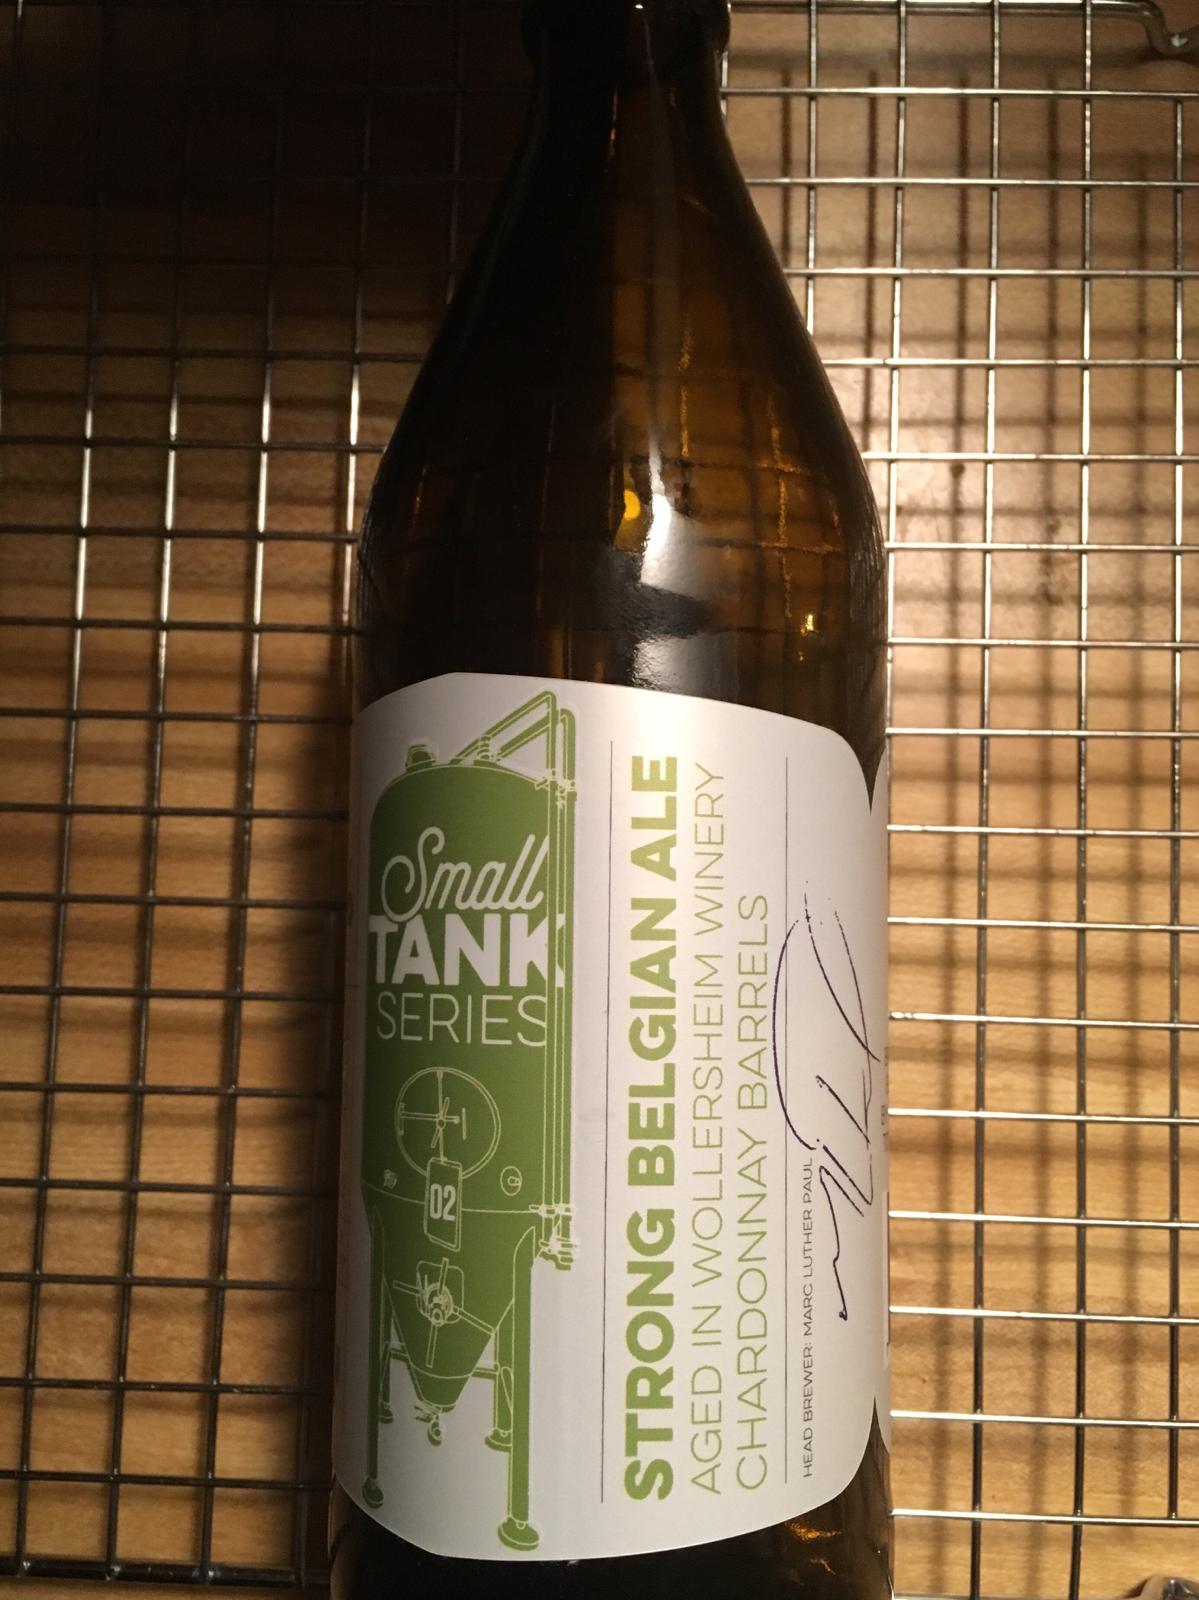 Small Tank Series: Strong Belgian Ale